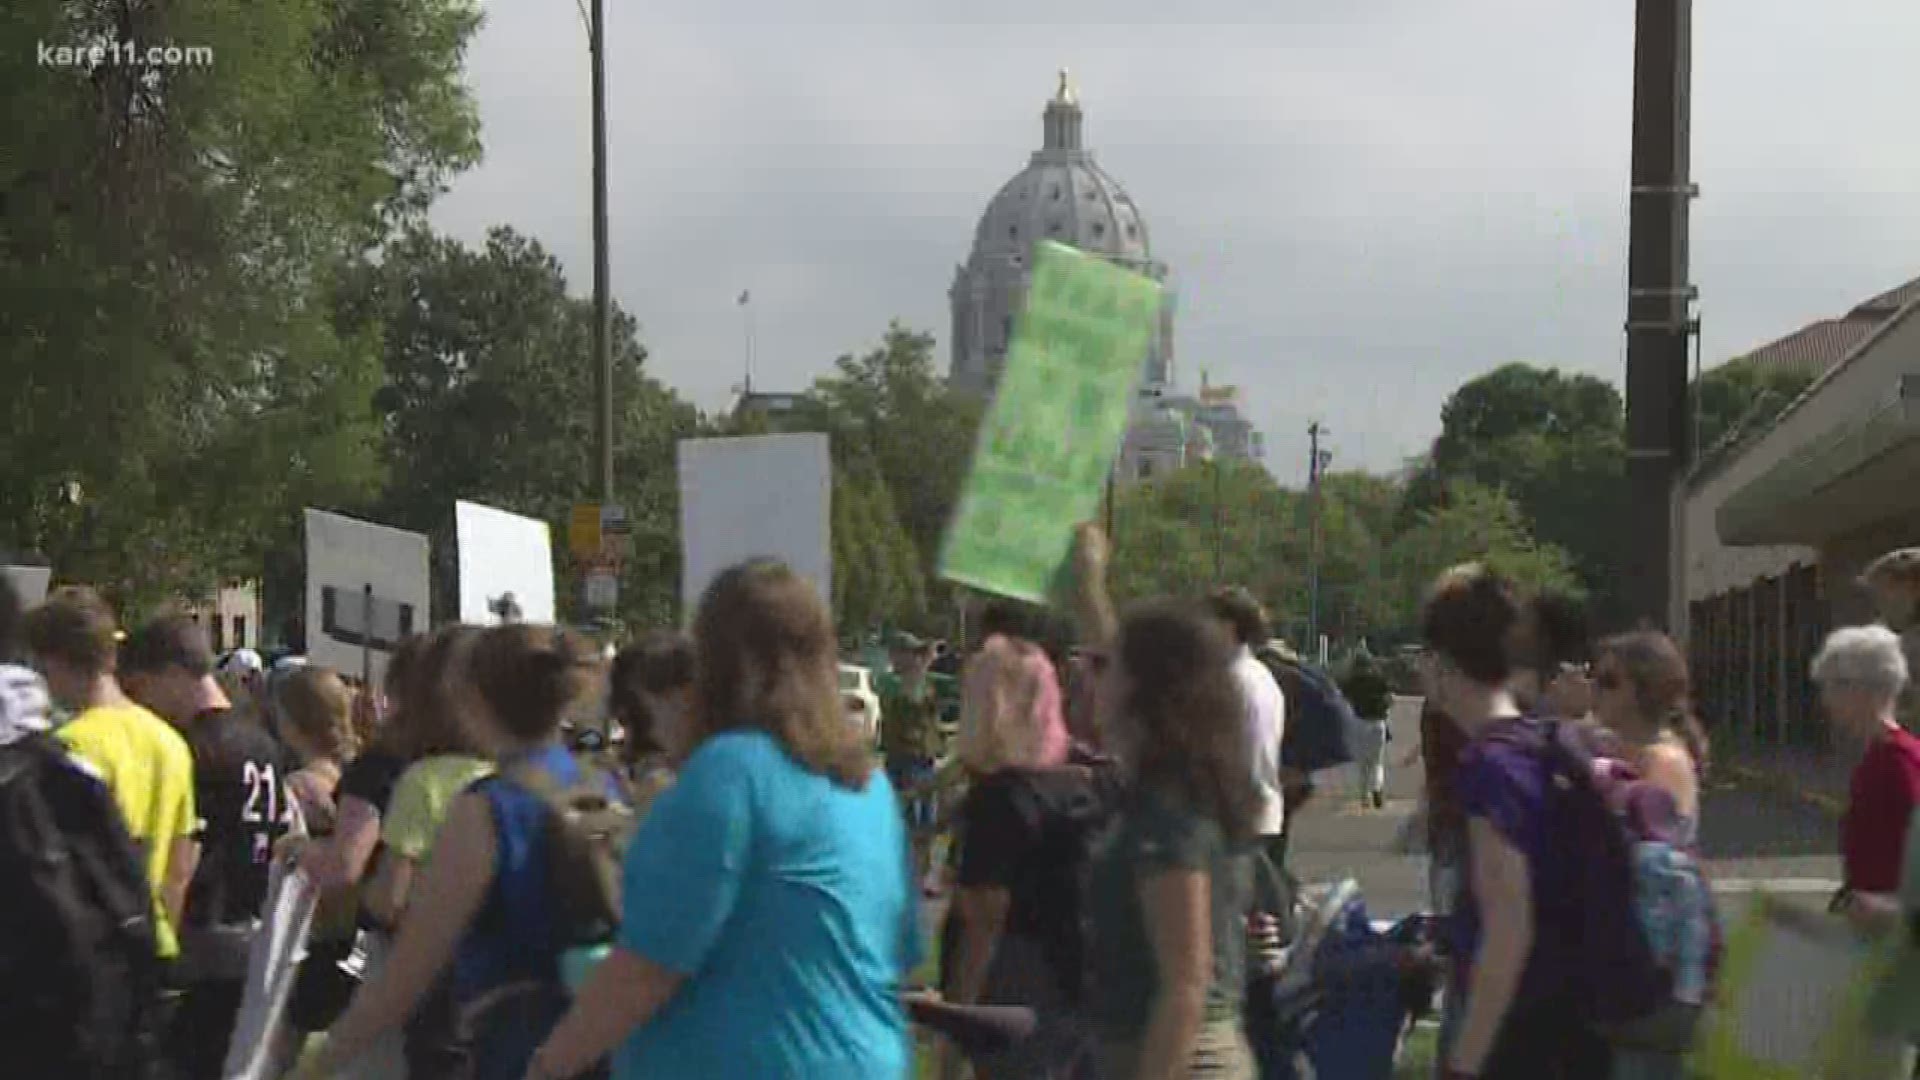 Thousands of protesters gathered at the State Capitol in St. Paul on Friday to call for government action to fight climate change.